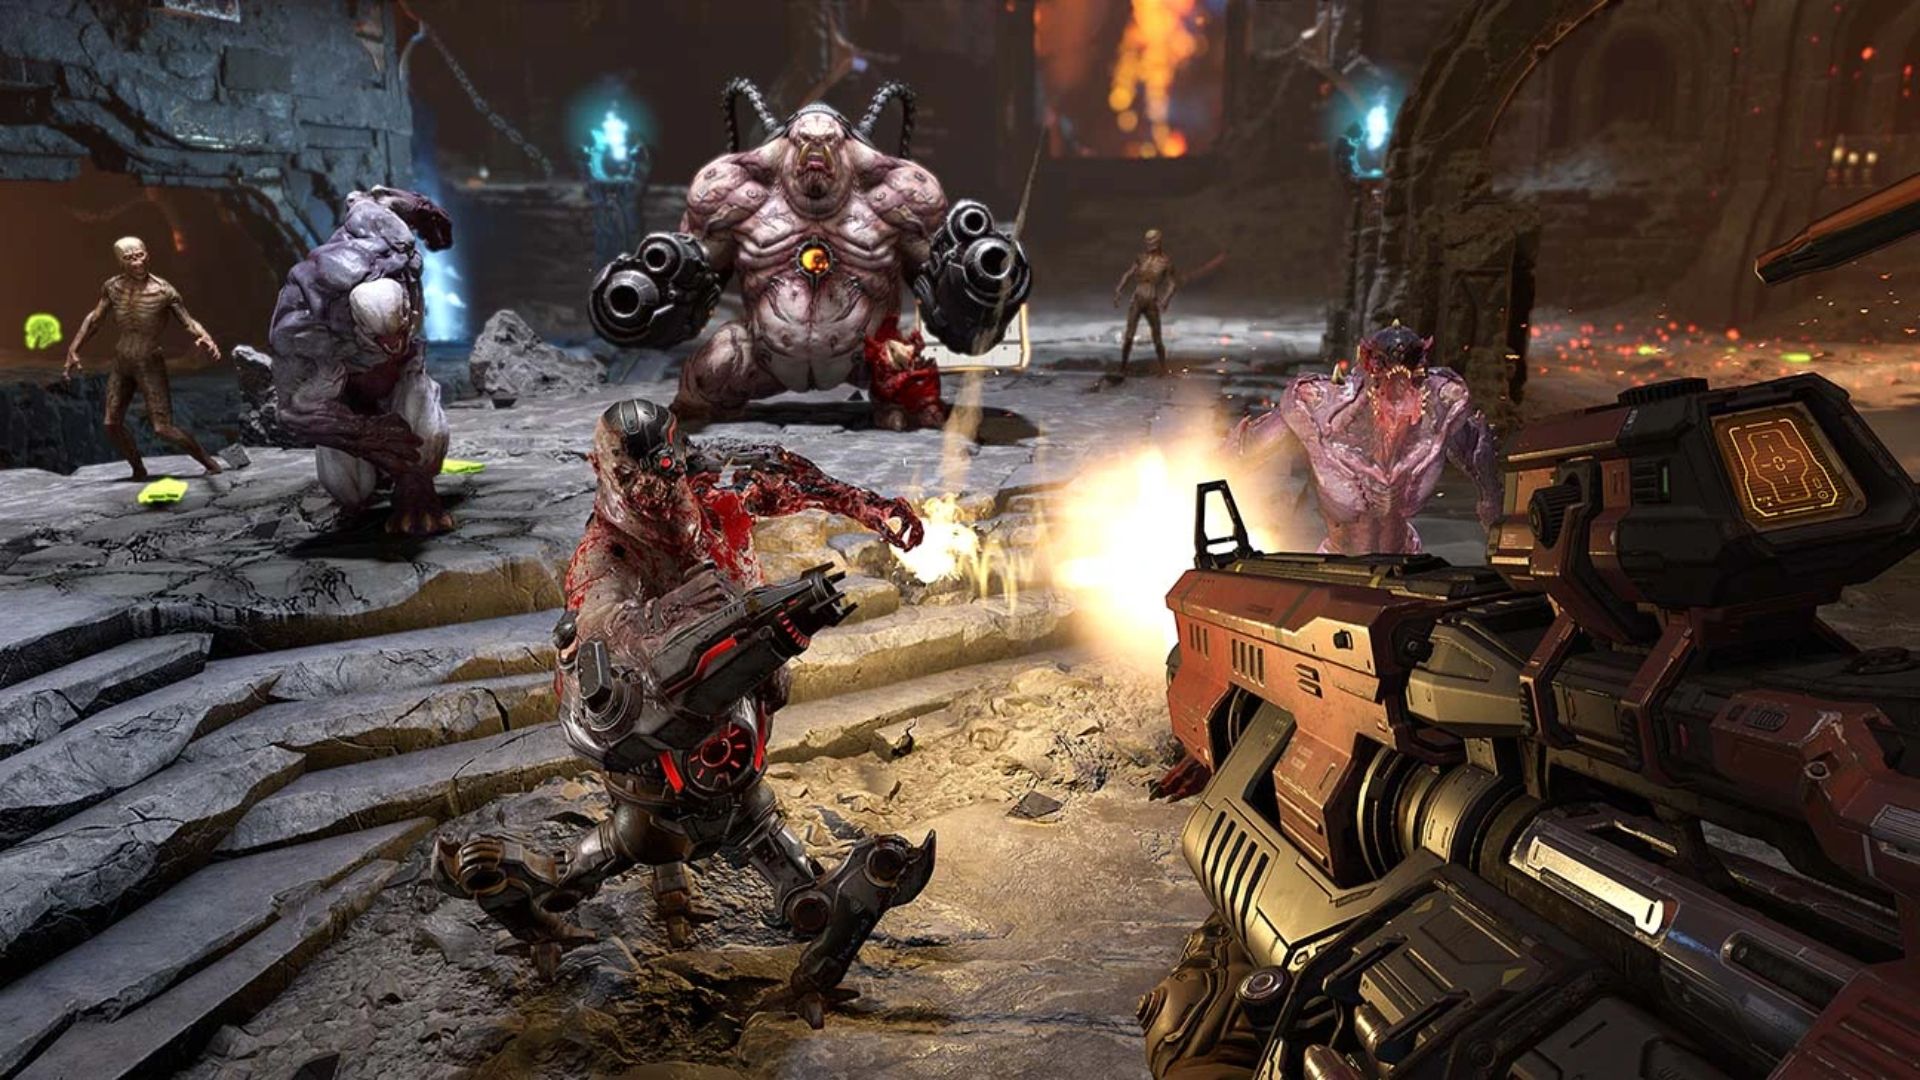 Best Xbox FPS games: a soldier fights several enemies with a gun in Doom Eternal